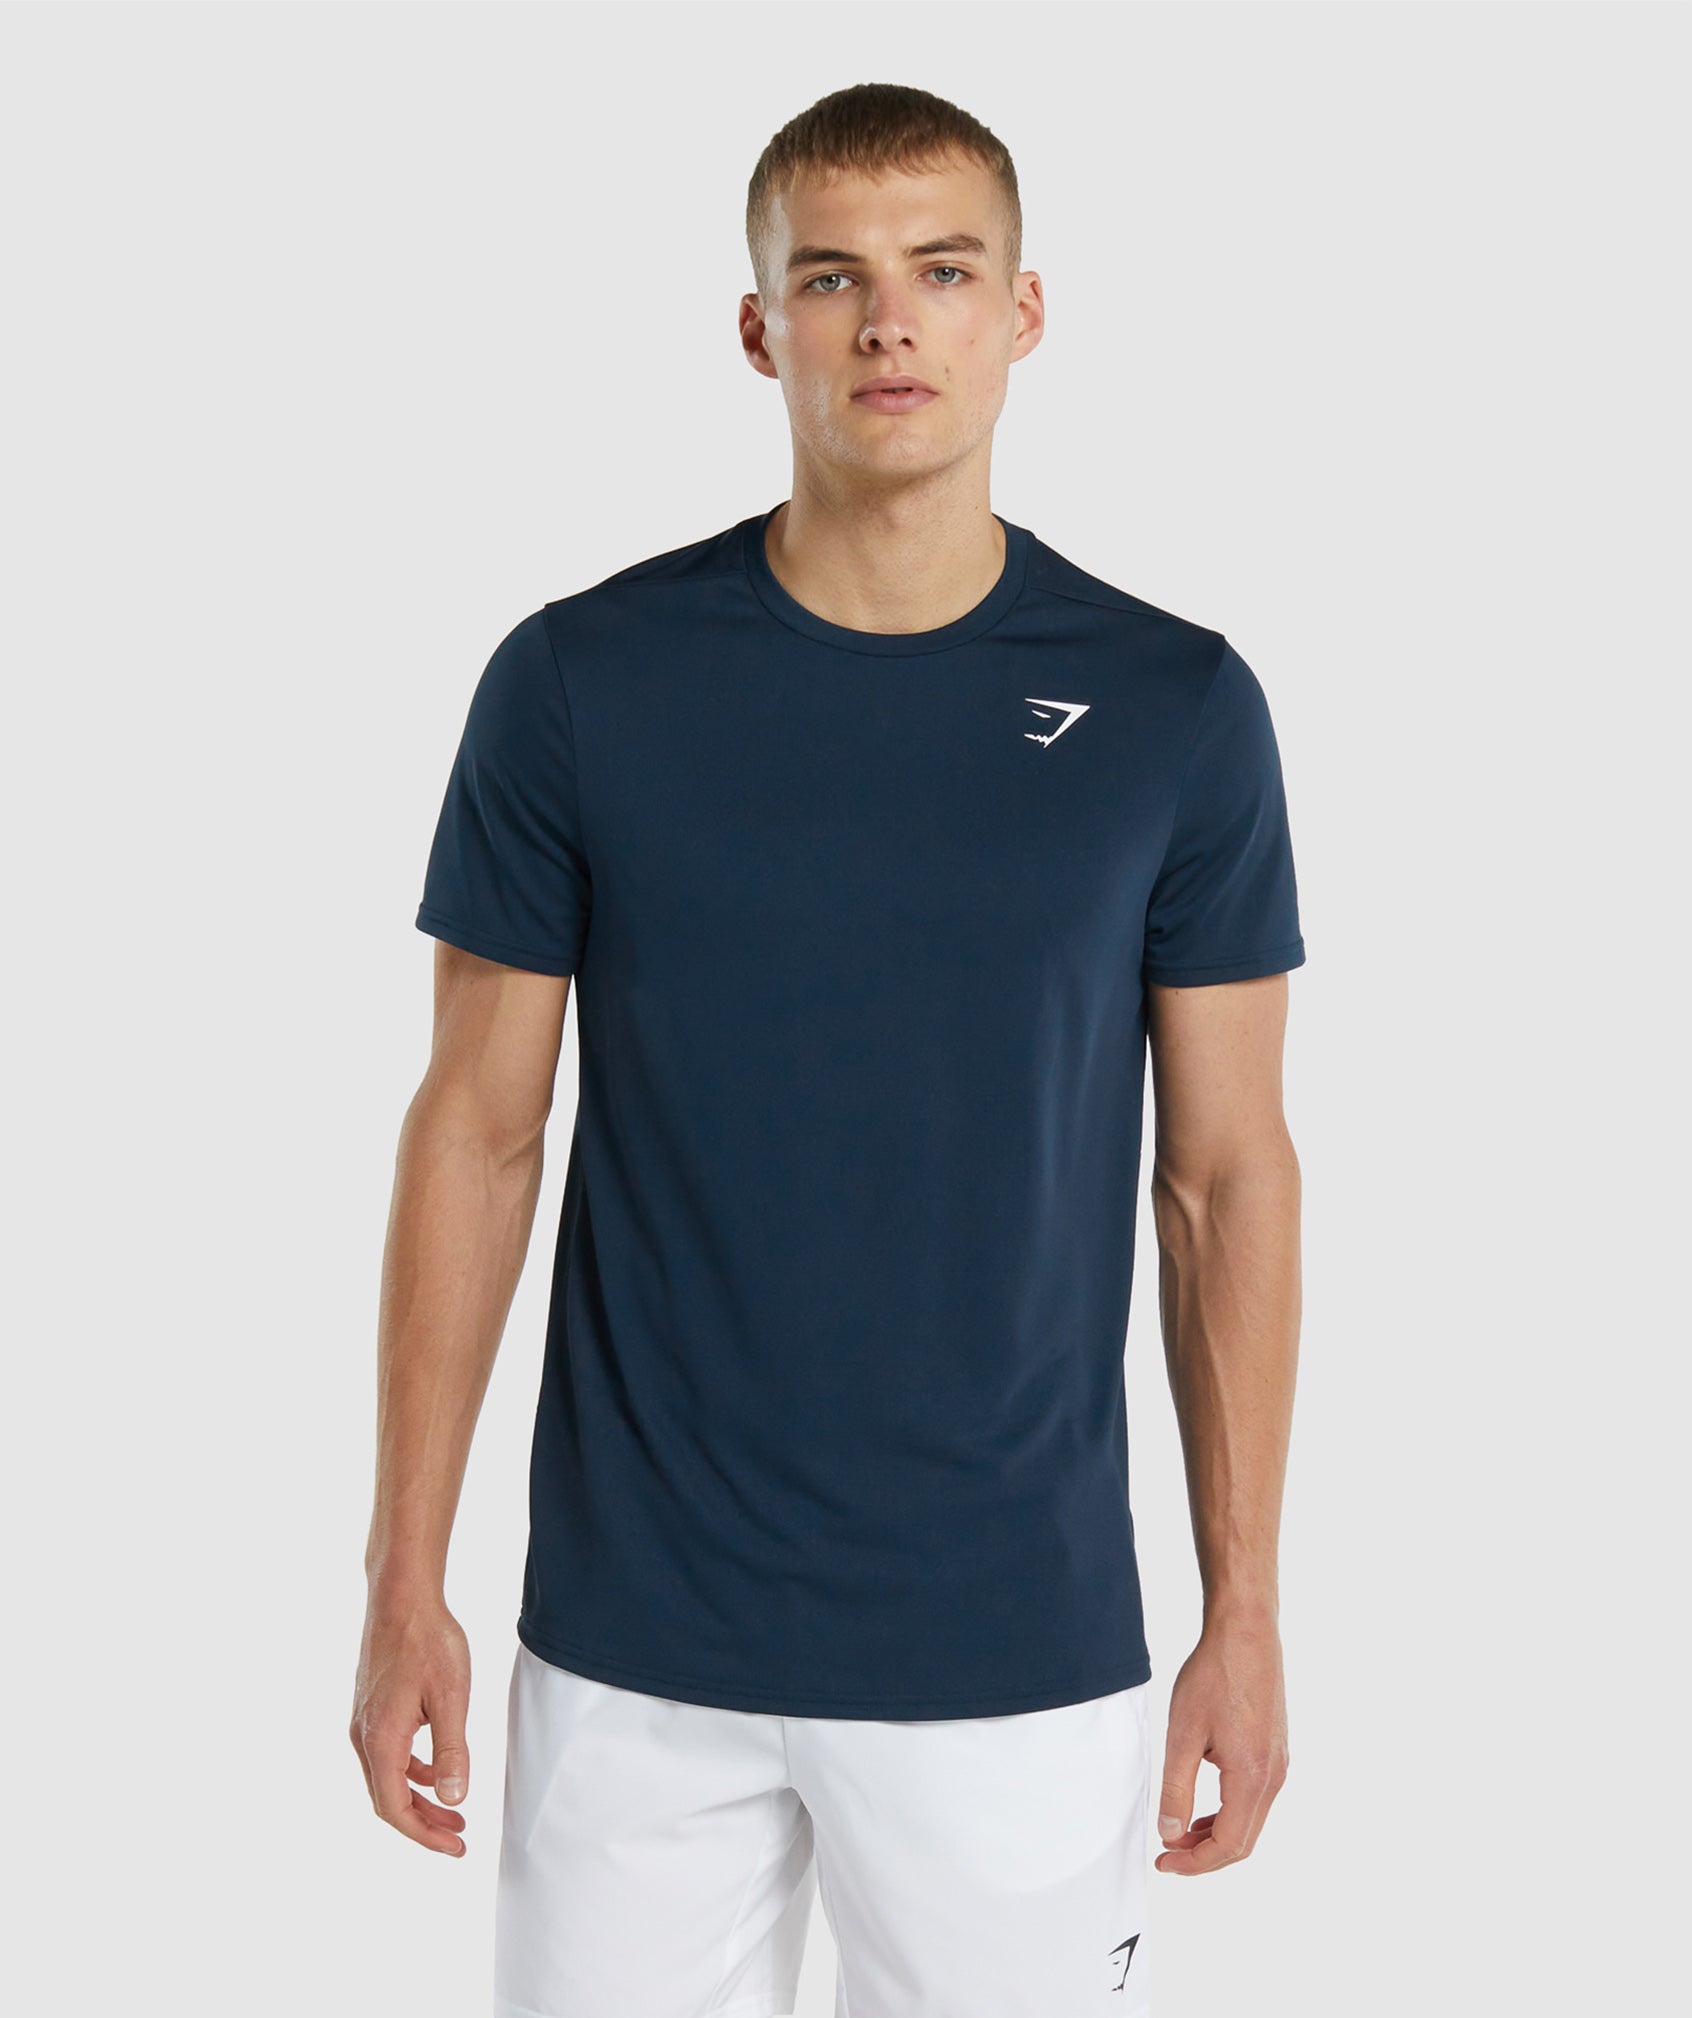 Arrival T-Shirt in Navy